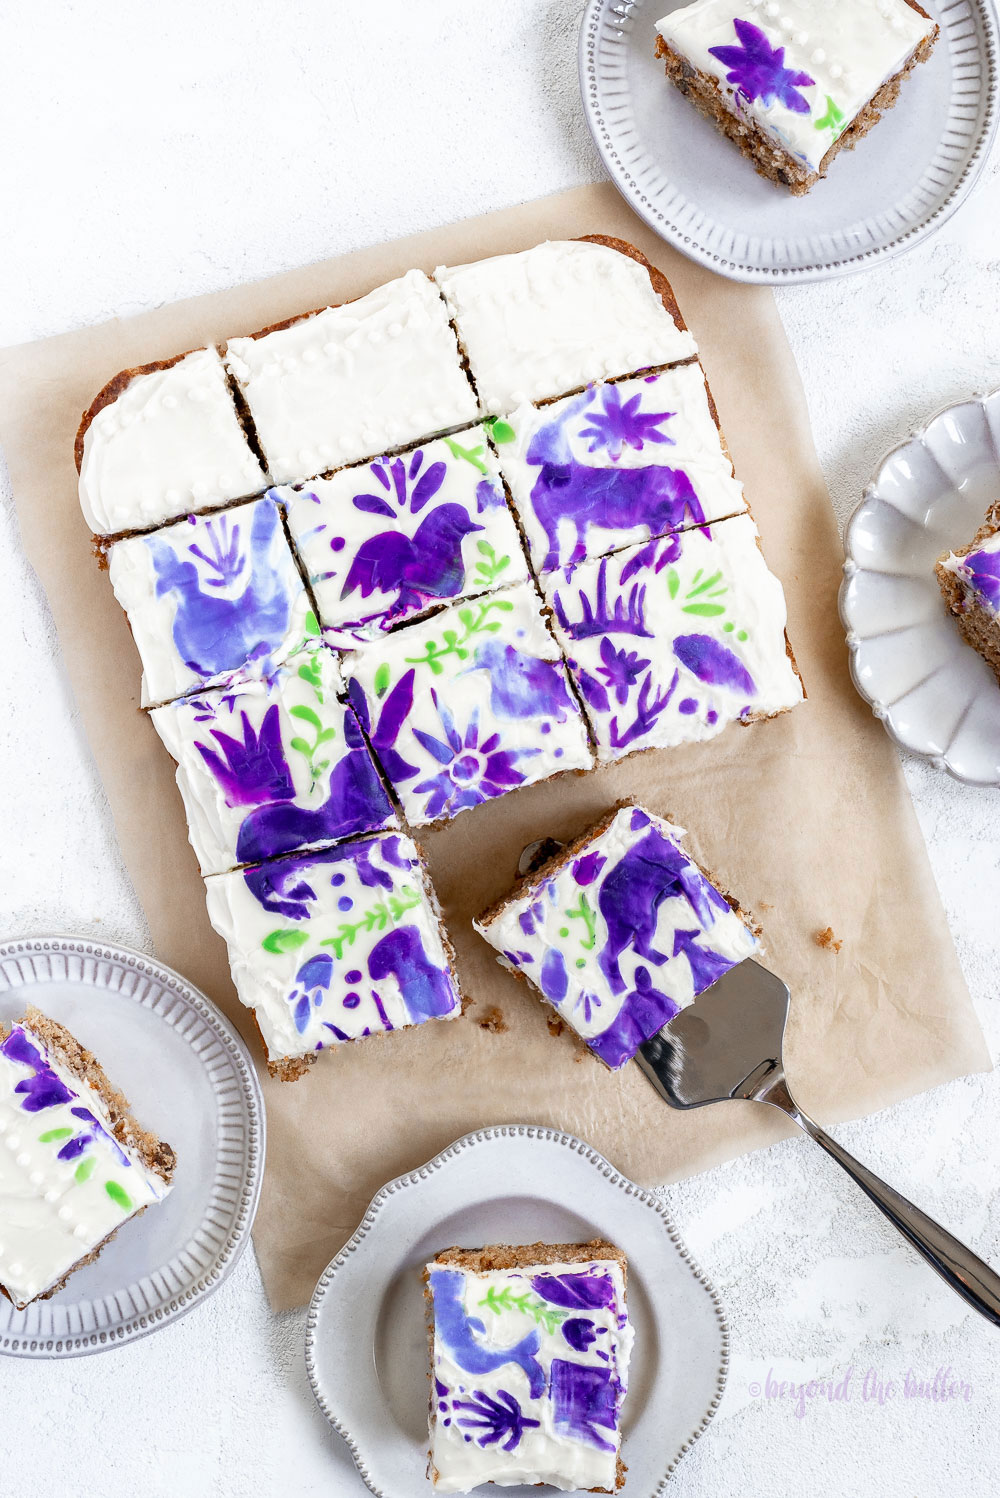 Hummingbird Sheet Cake with White Chocolate Cream Cheese Frosting | Overhead photo of Hummingbird Sheet Cake that's topped with a white chocolate frosting, and stenciled using purple and green frosting | Image and Copyright Policy: © Beyond the Butter, LLC.